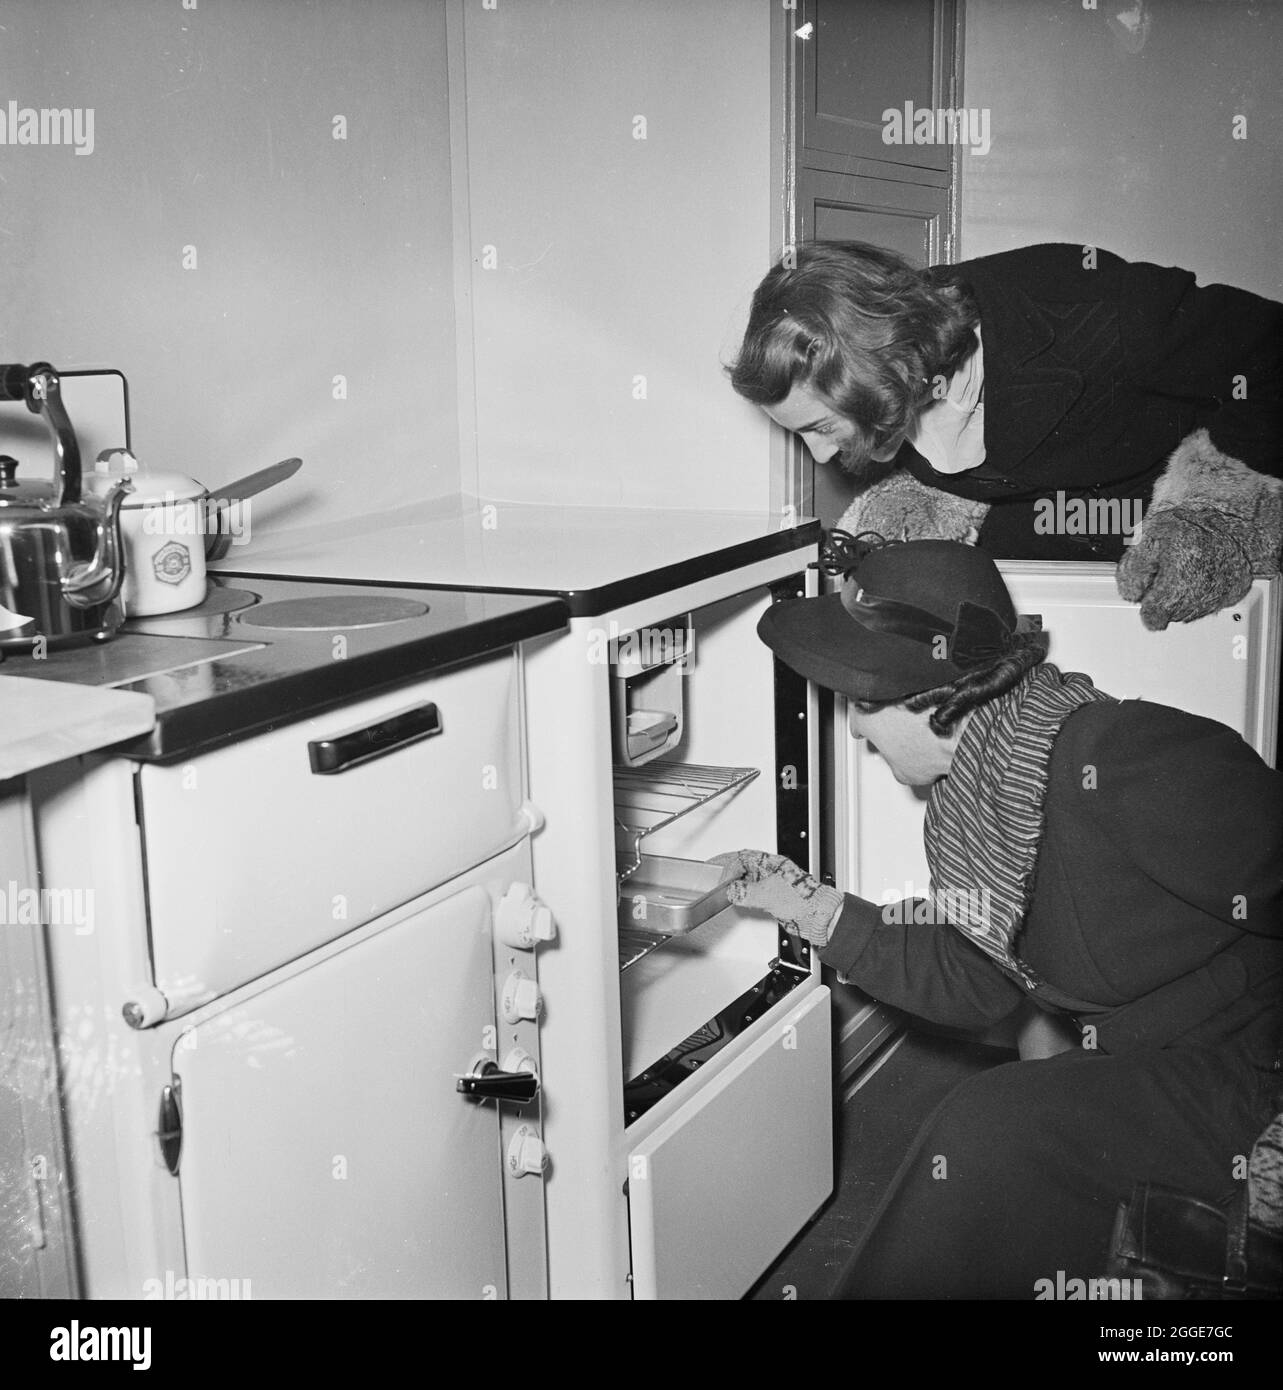 Two women admiring a fridge in the kitchen of the 3000th Easiform dwelling to be completed in Bristol, on the day of the ceremonial opening. This image is recorded in the Laing register as having been taken for the South-West Board. Stock Photo